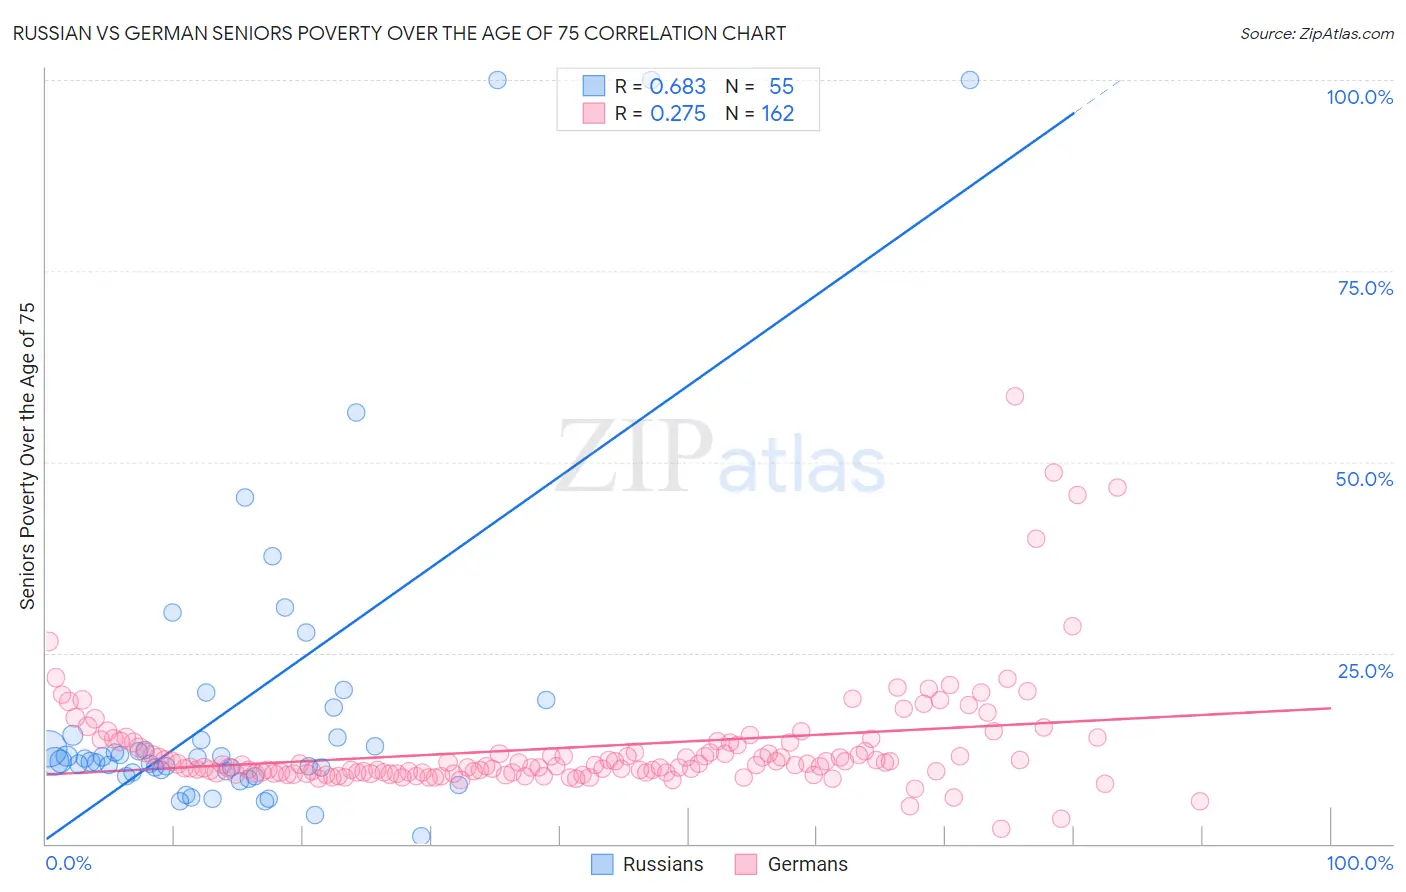 Russian vs German Seniors Poverty Over the Age of 75